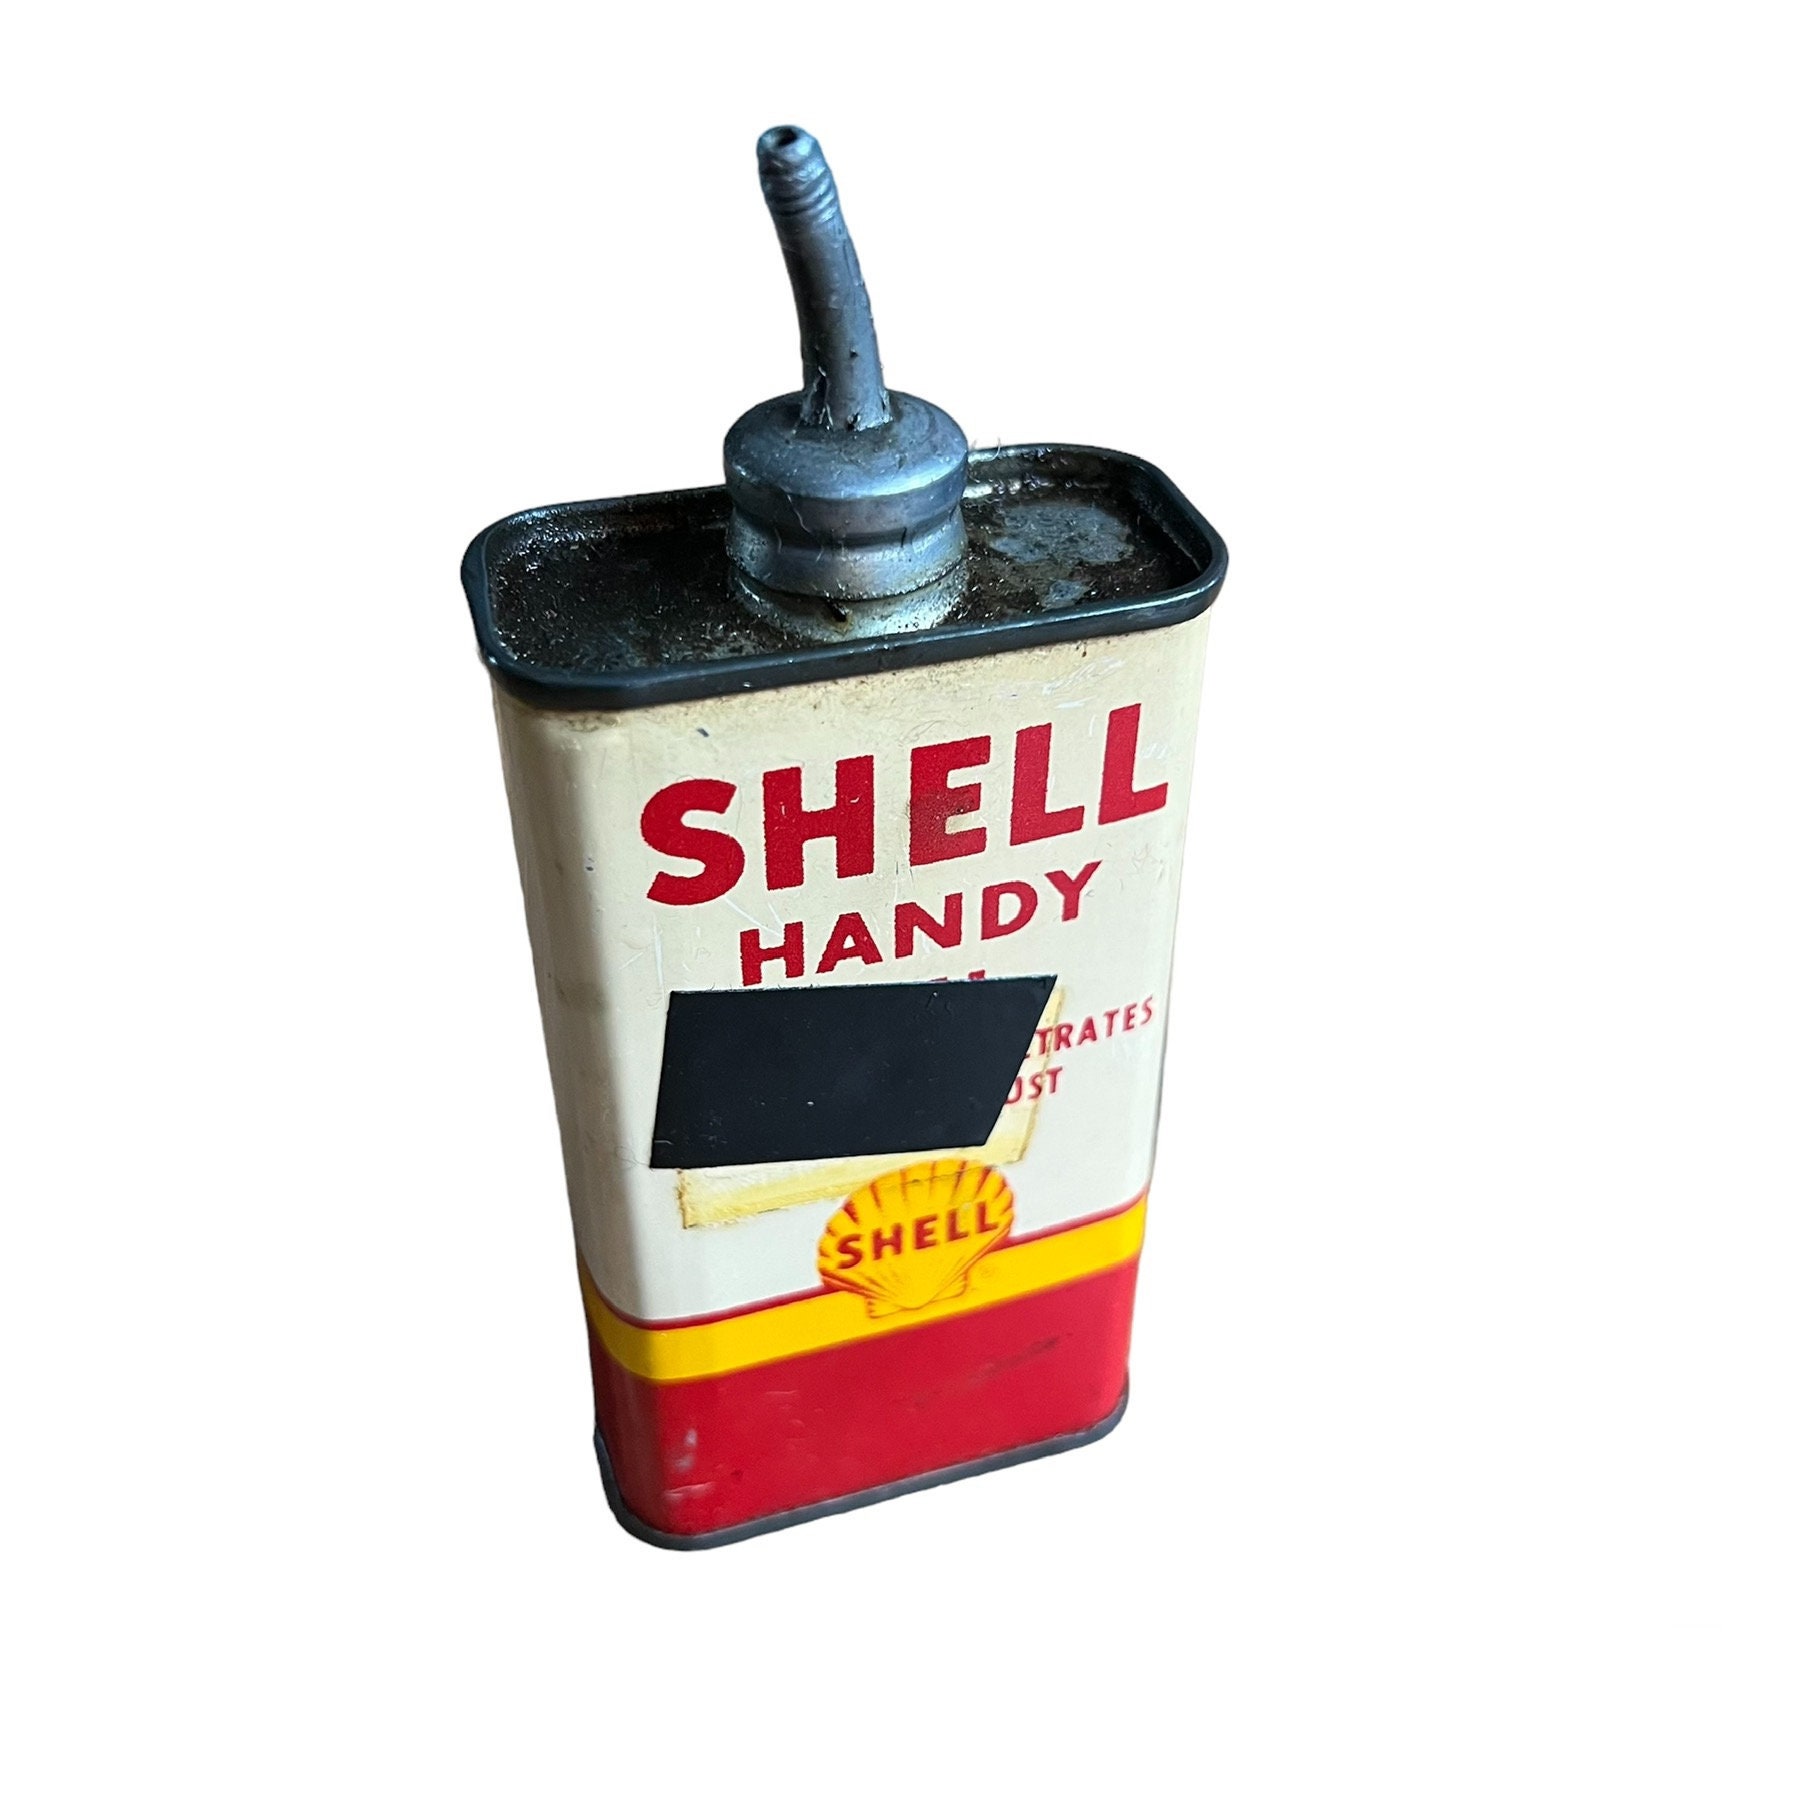 VTG SHELL HANDY Oil Oiler Can 4oz Lead Spout Partially Full Estate Find  Condition: Tape Over a Puncture, Honest W 